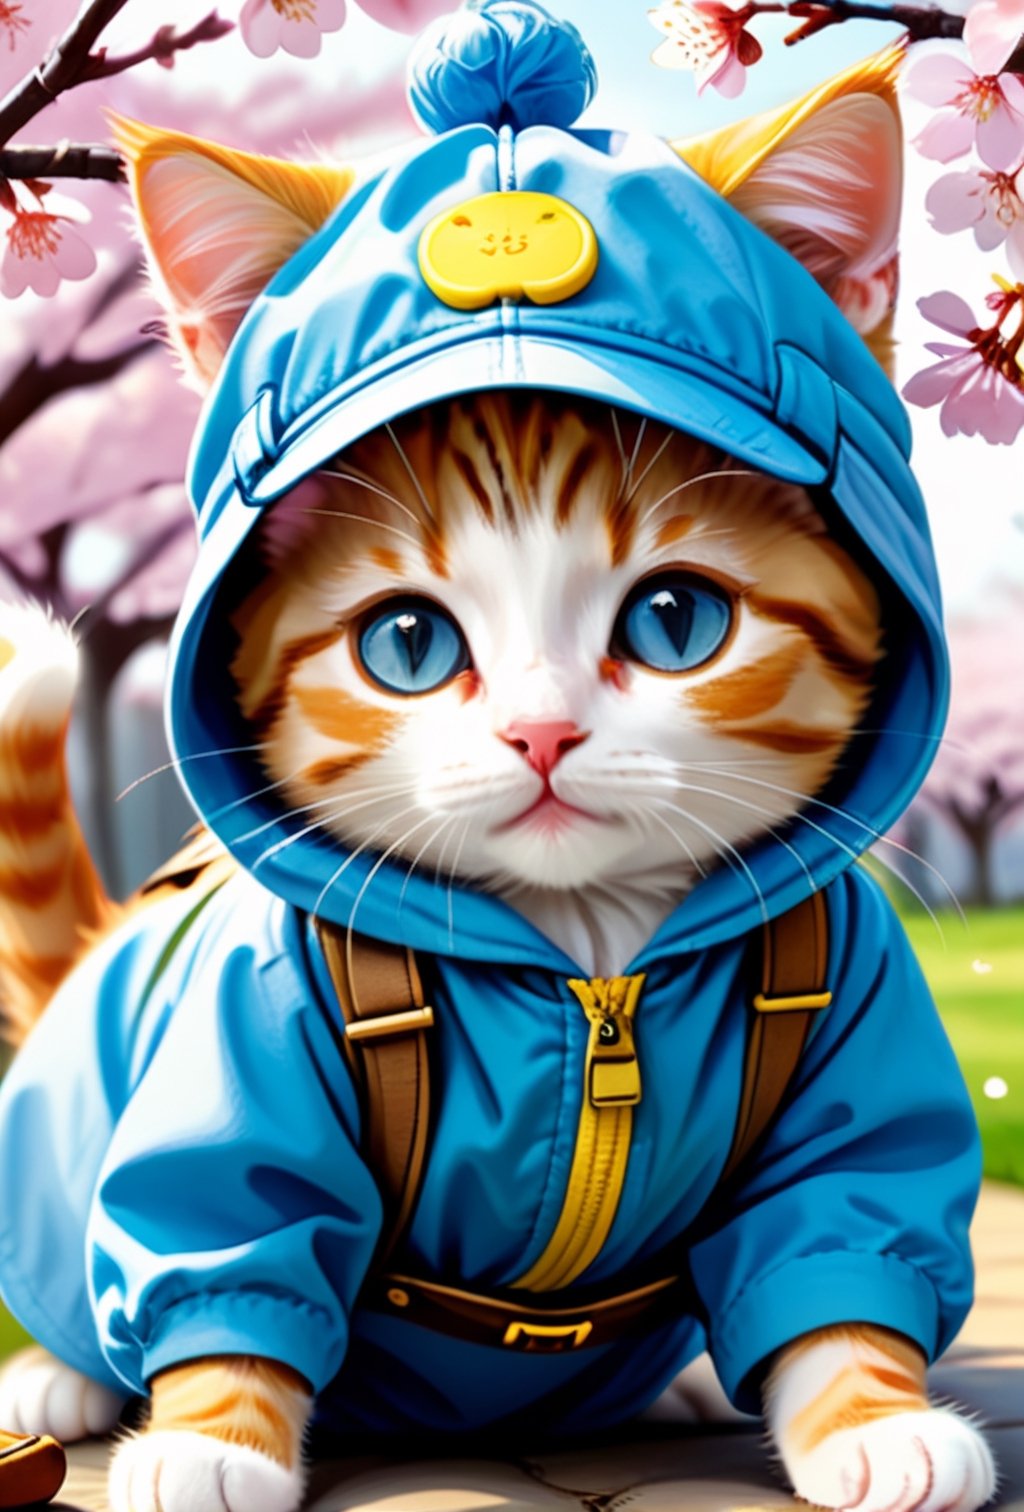 A beautiful cat drawing, (Eroticism:1.4), a beautiful cat portrait, a drawing of a kitten in a kindergartener's pastel blue smock clothes, shorts and a yellow hat, a small shoulder bag, a beautiful kitten in a kindergartener's outfit, a beautiful kitten in a kindergartener's outfit lying on its back A cat kitty that looks like a kindergartener playing, a background full of cherry blossoms, a beautiful kitten that looks like a kindergartener lying down, playing,